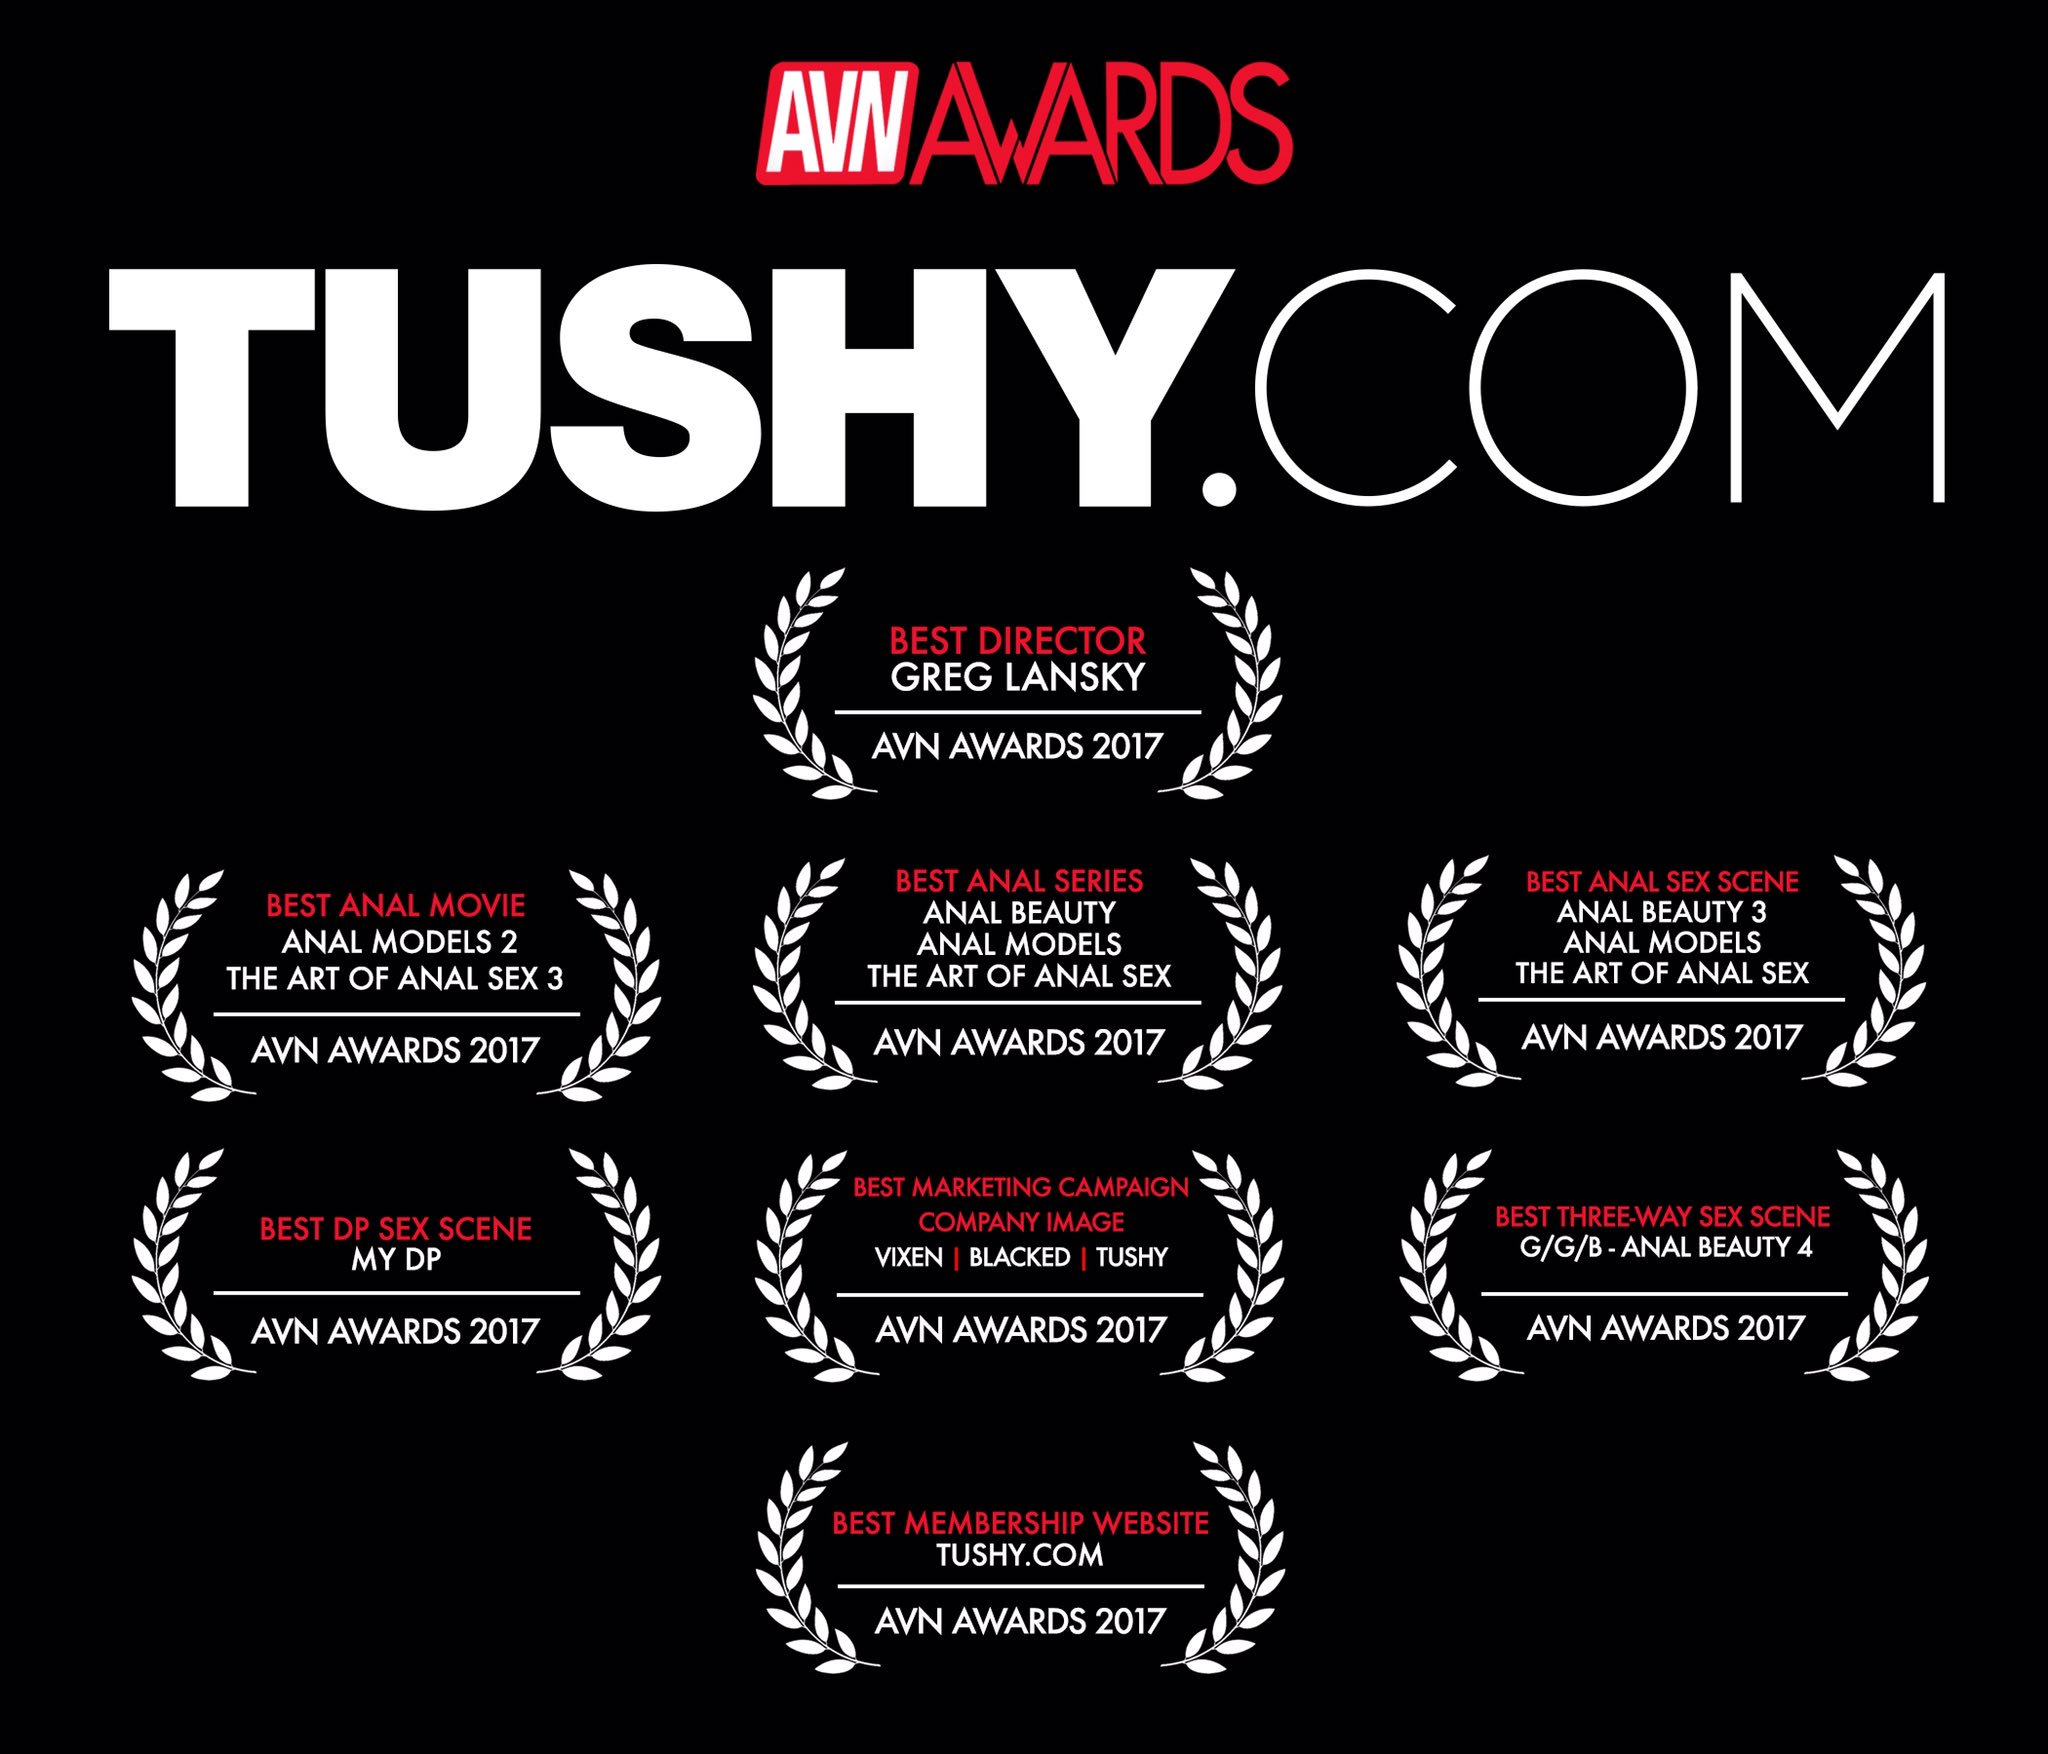 “We thank you @AVNawards, for all the @Tushy_com nominations! 